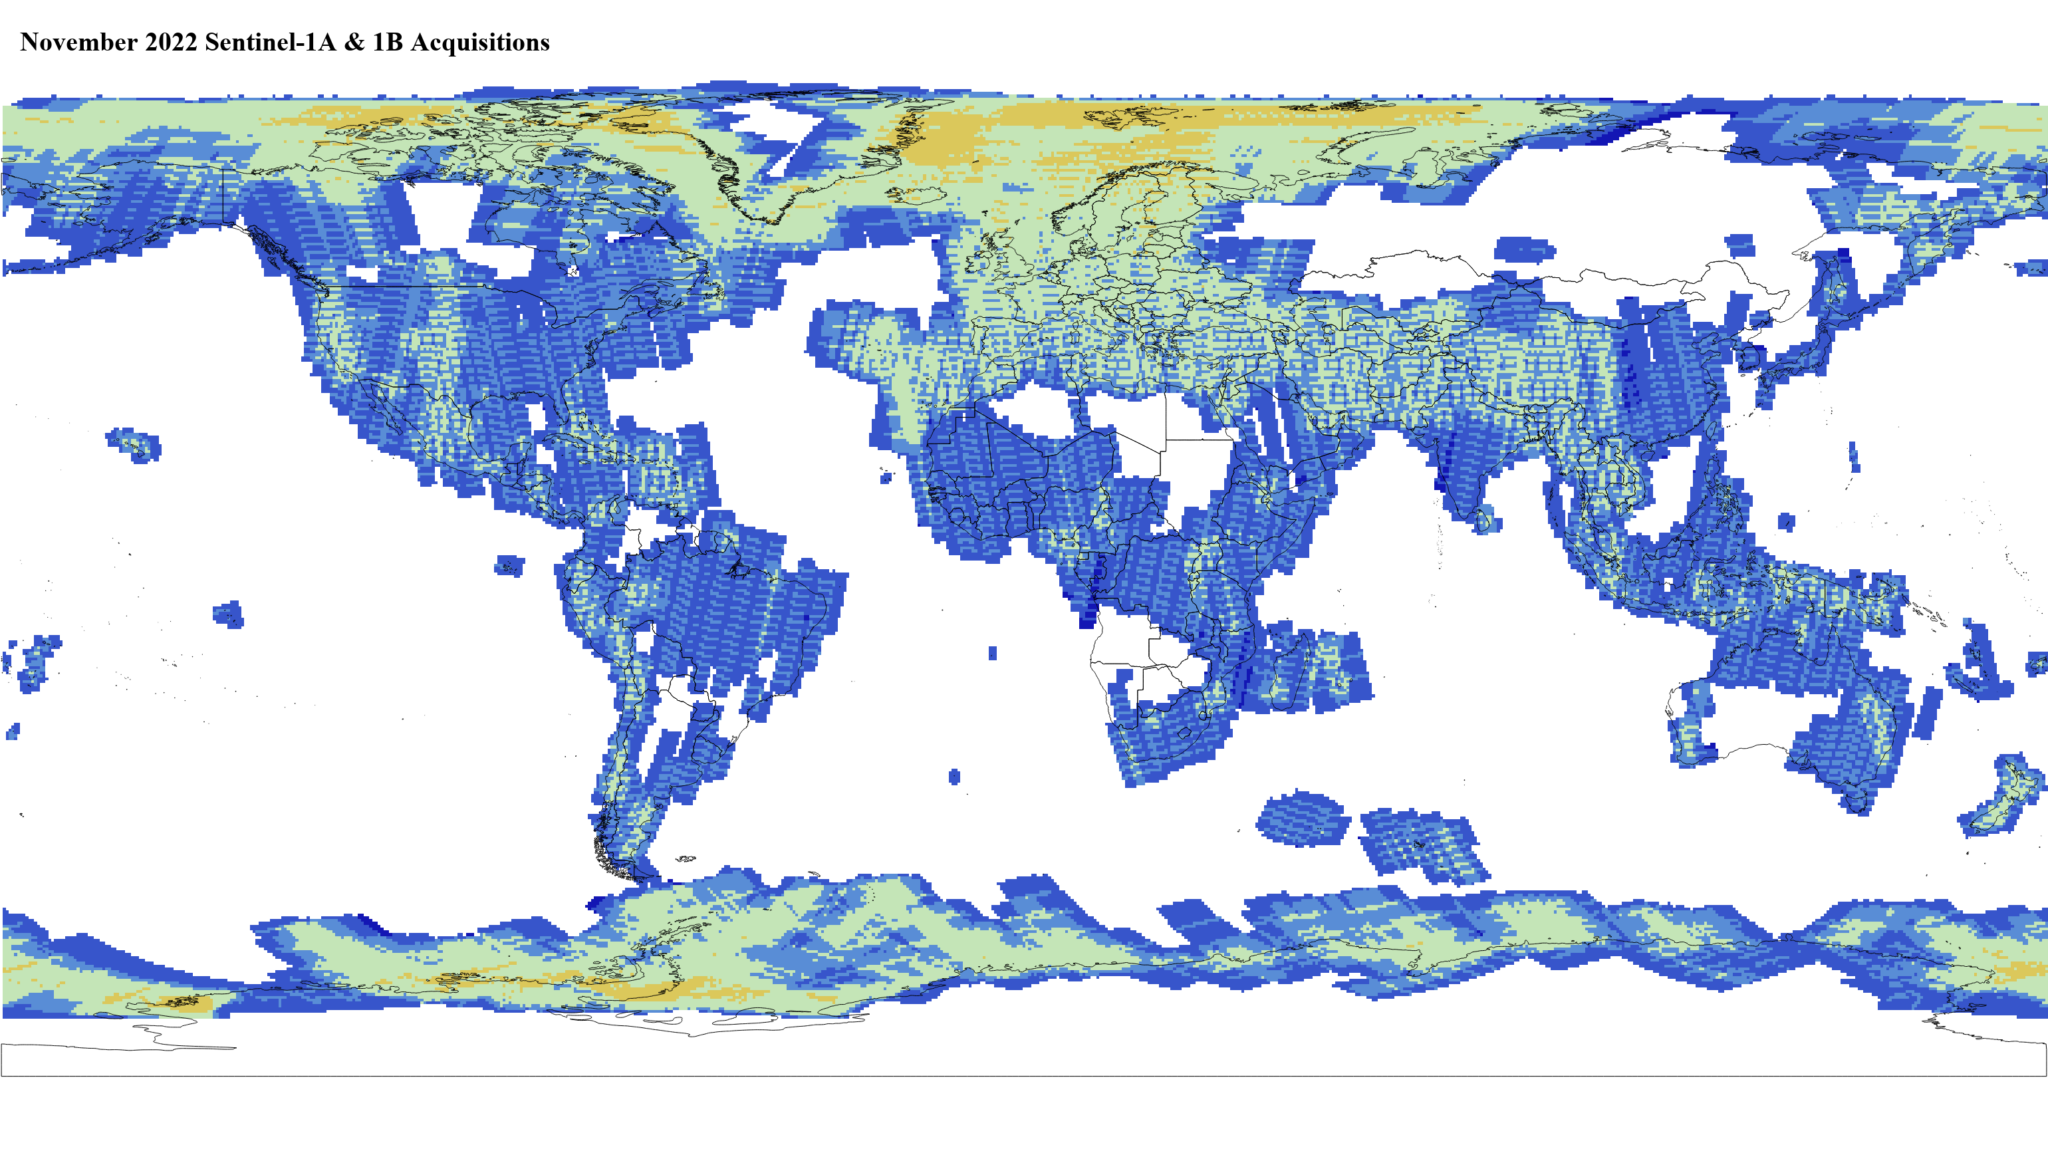 Heat map of Sentinel-1A and -1B GRD global acquisitions November 2022